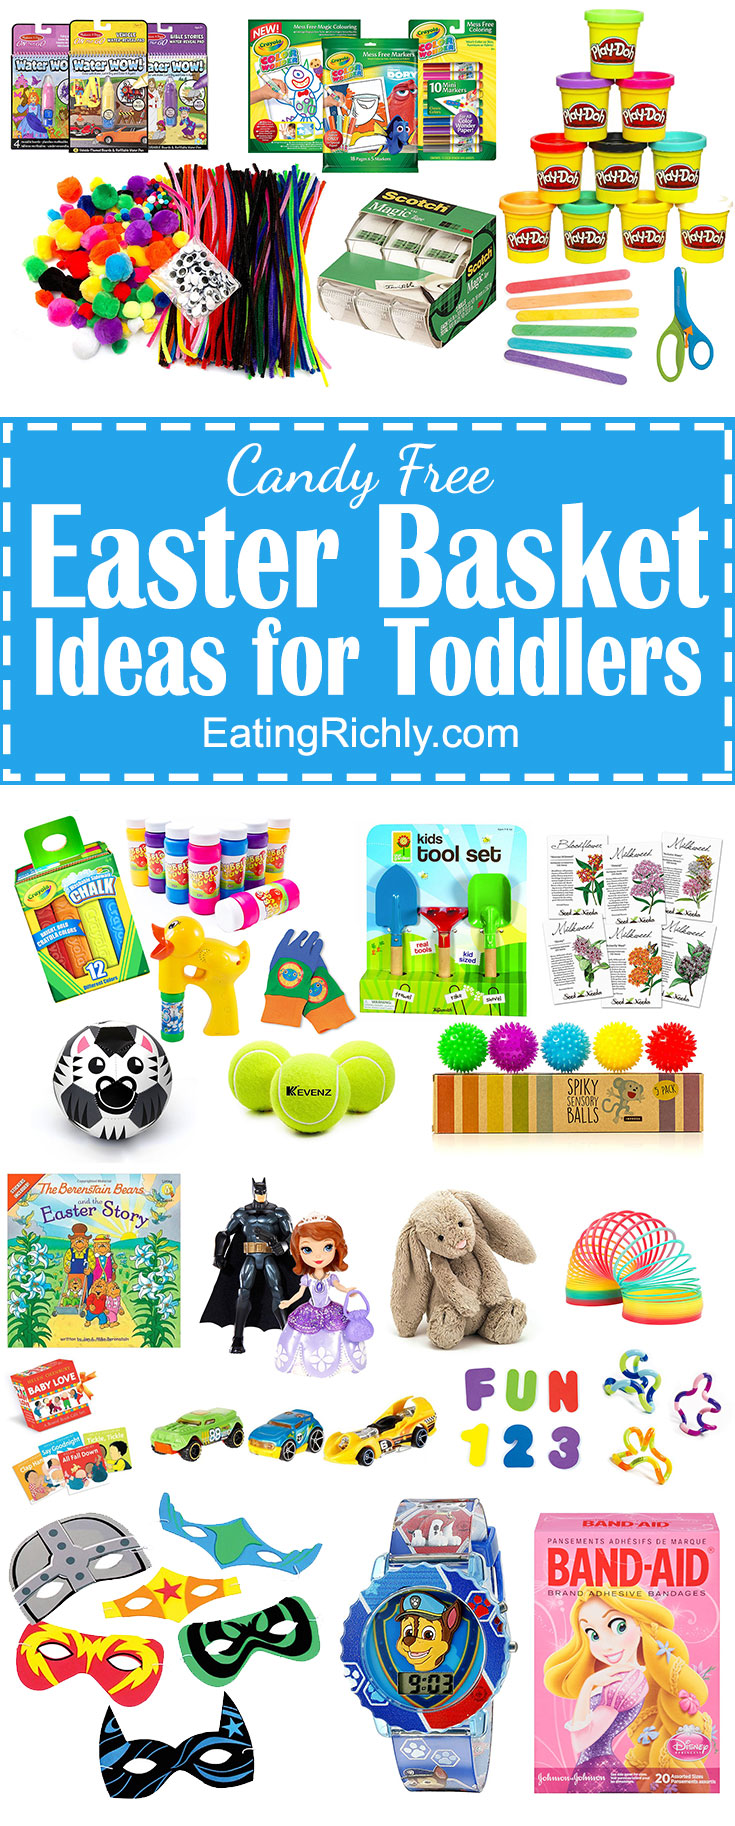 From arts and crafts to outdoor fun, check out 30 no candy Easter Basket ideas for toddlers! From EatingRichly.com